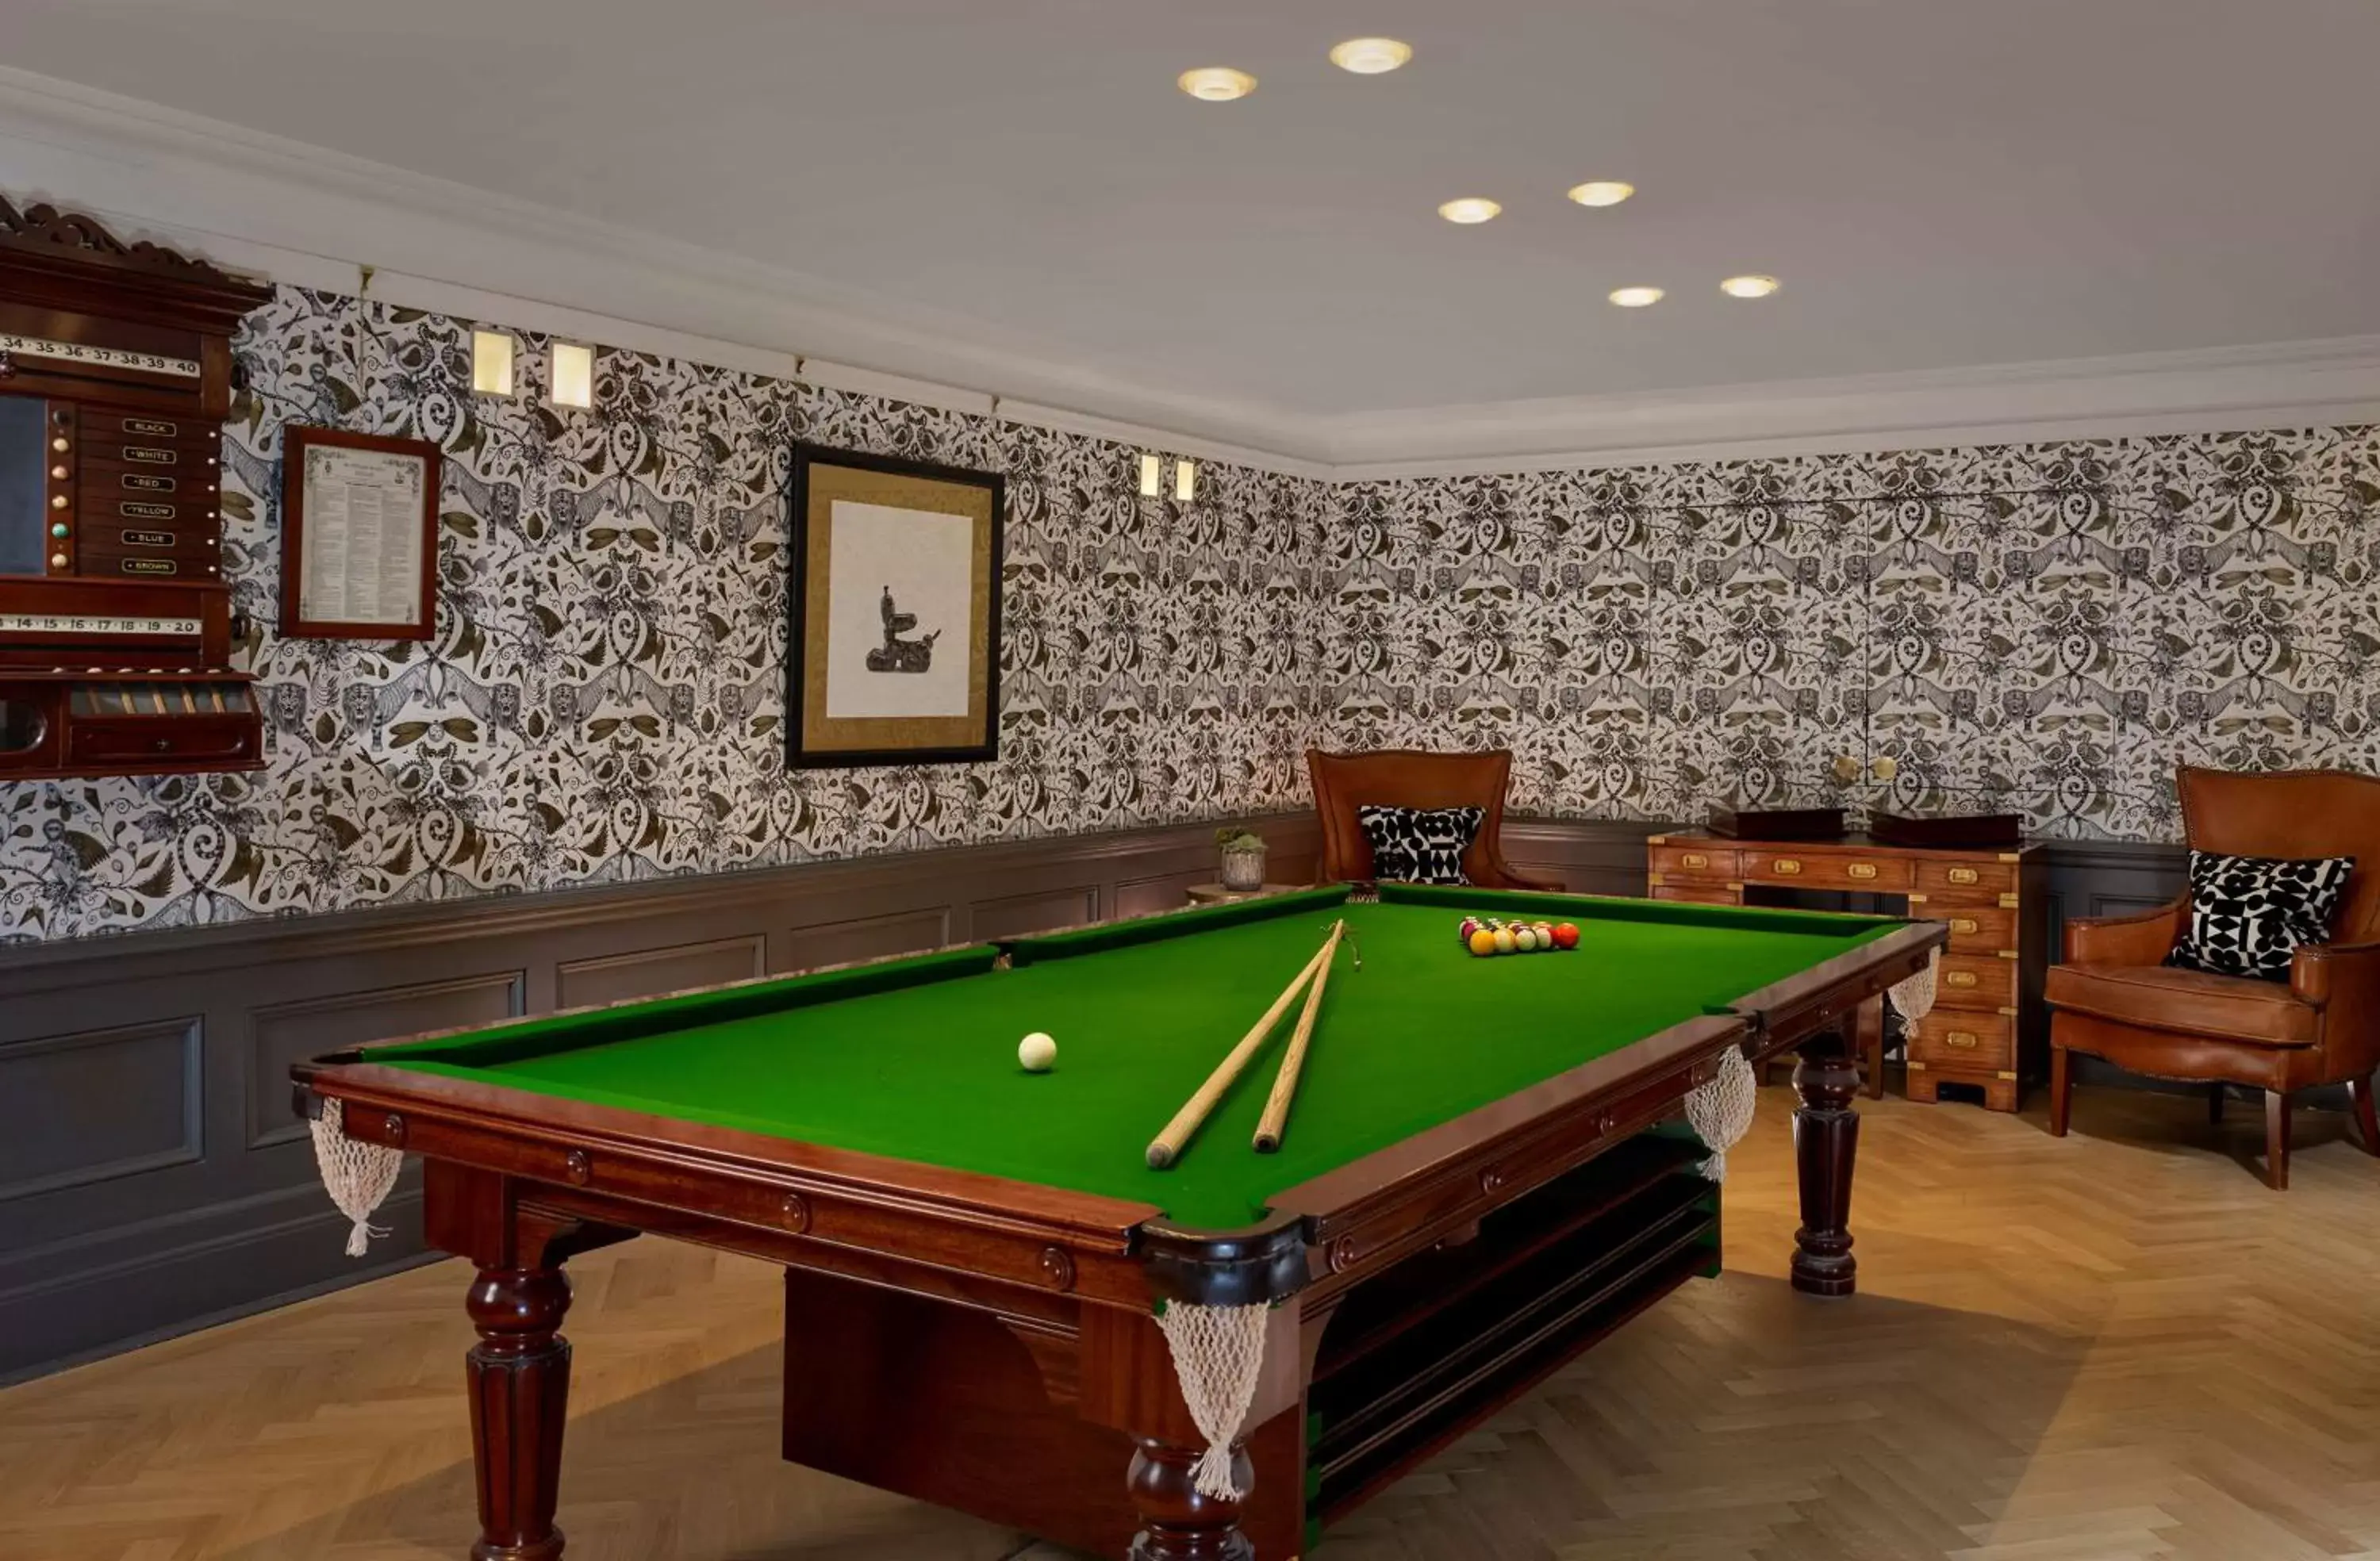 On site, Billiards in Holmes Hotel London